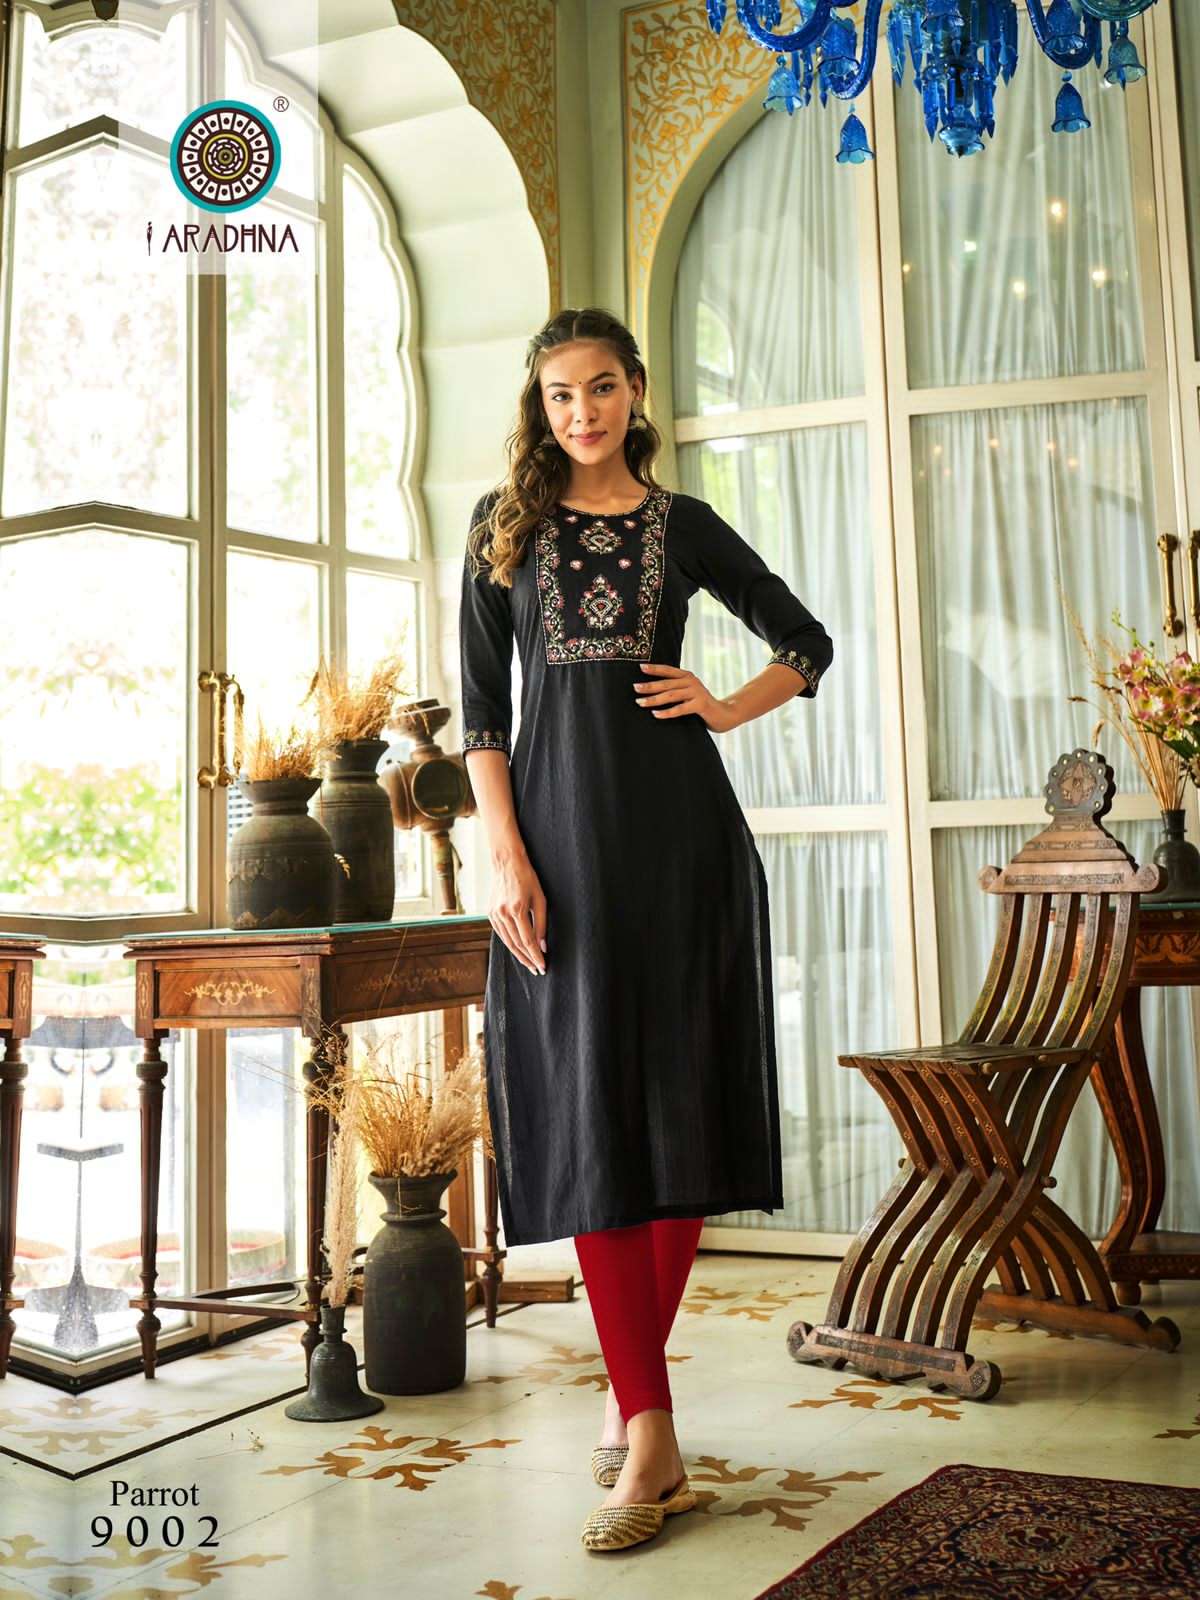 aradhana parrot vol 9 9001-9006 series fancy viscose with embroidery work kurtis wholesale price surat